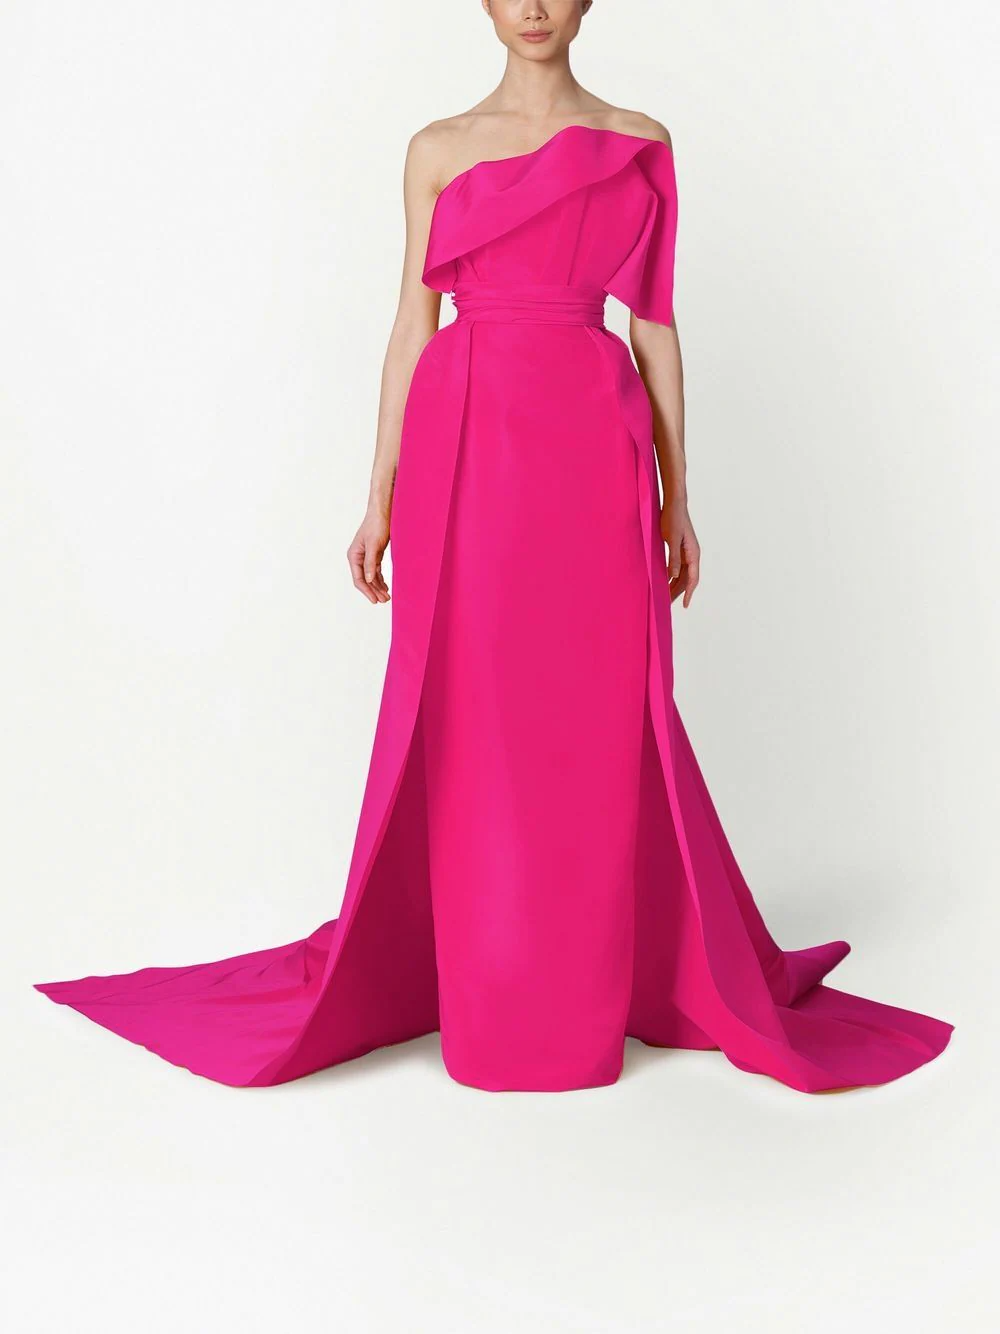 hot pink strapless gown with asymmetrical draping and long train